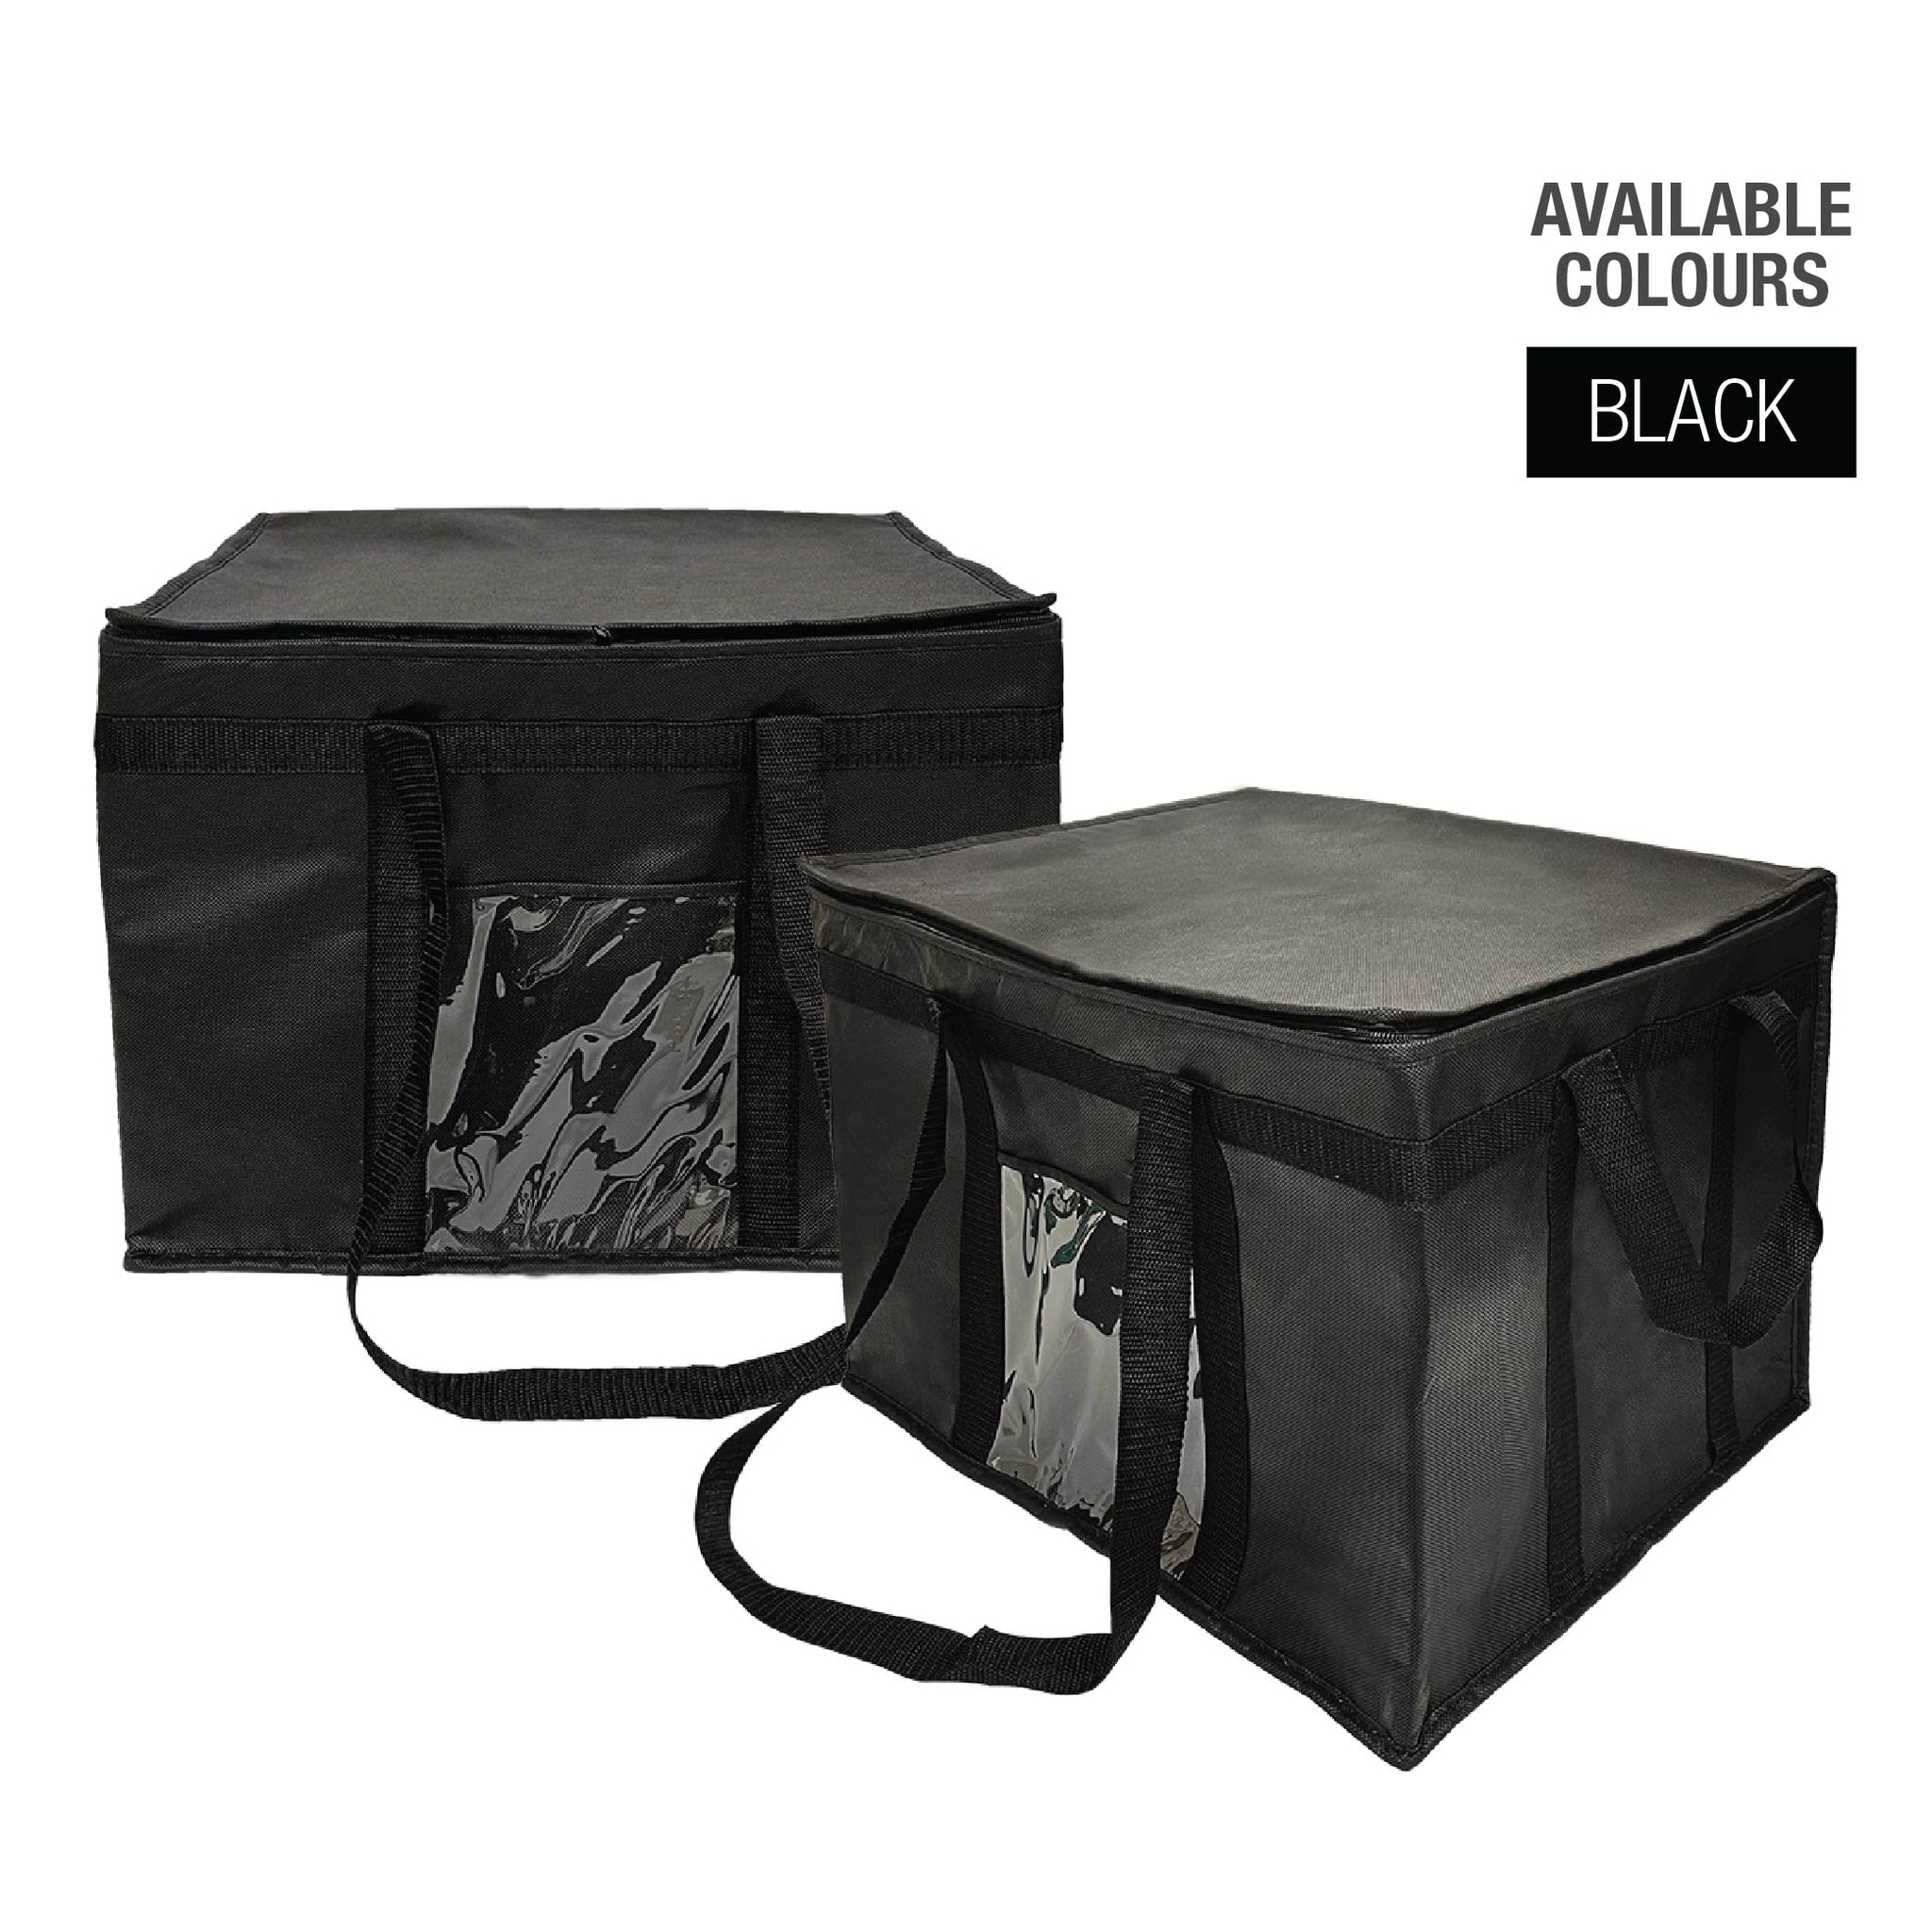 Bulk 10 pcs / Pack - 18"W x 15"D x 14"H Thermal / Insulated Jumbo Delivery Bag with Extra 2 Sides Handle - 2.5mm insulation